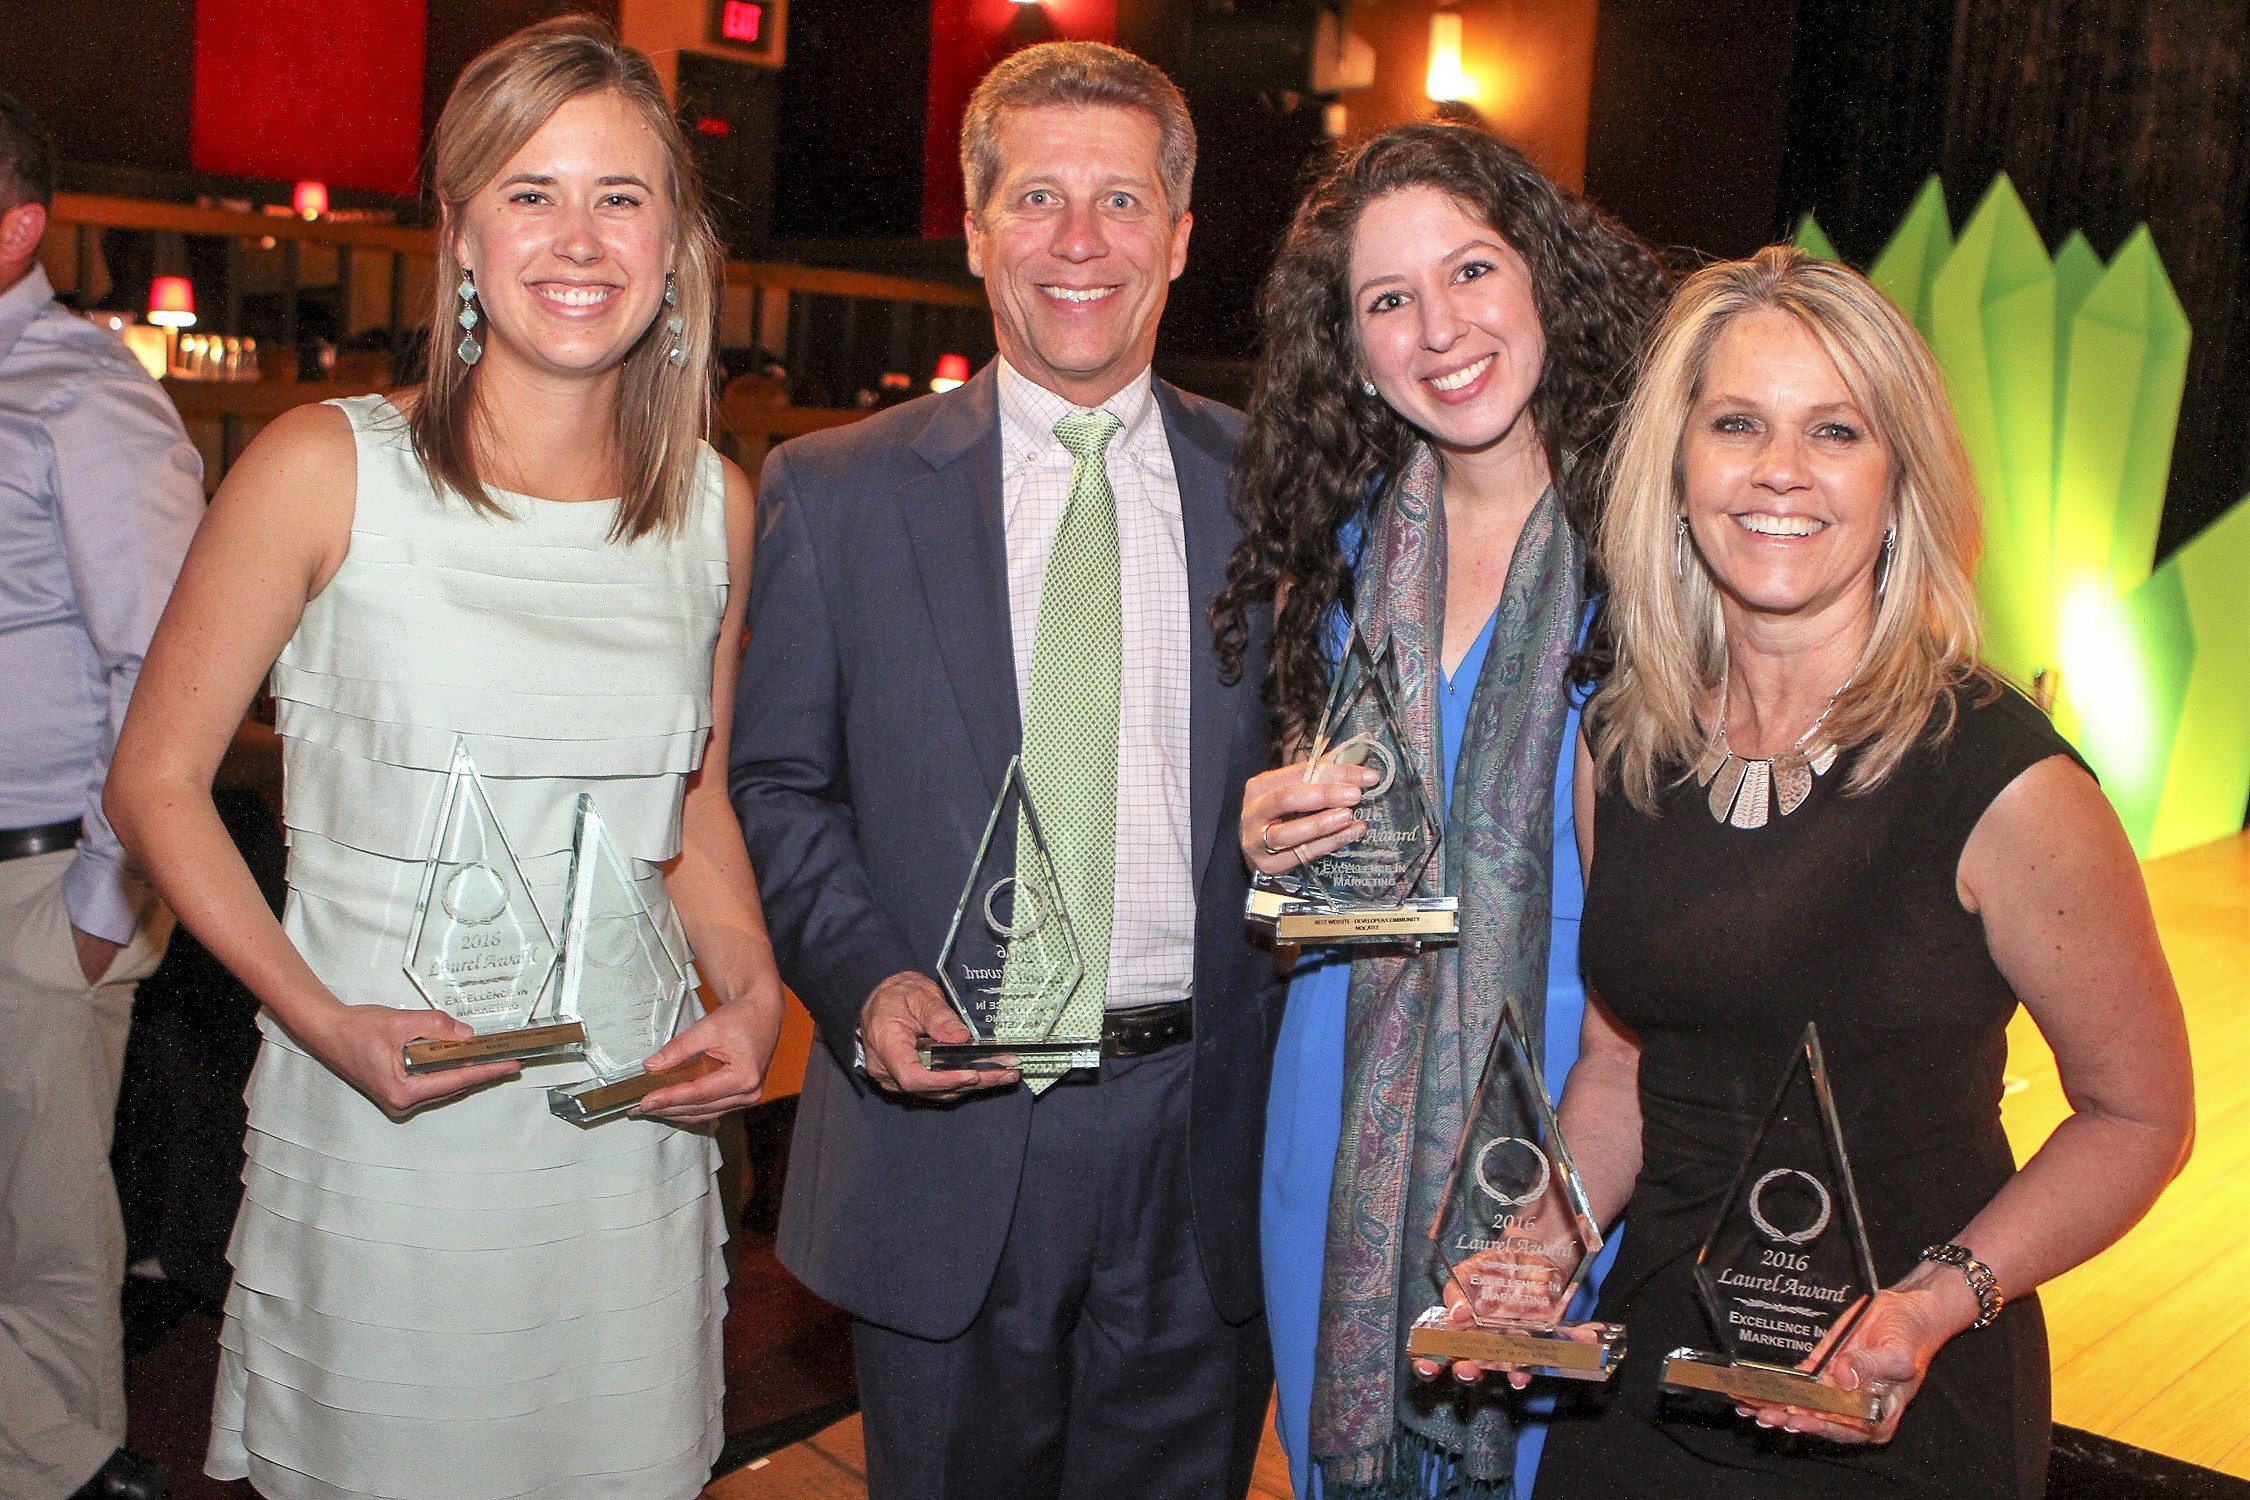 The PARC Group President Rick Ray and the firm’s marketing team display some of the awards Nocatee’s master developer received at the recent Laurel Awards.